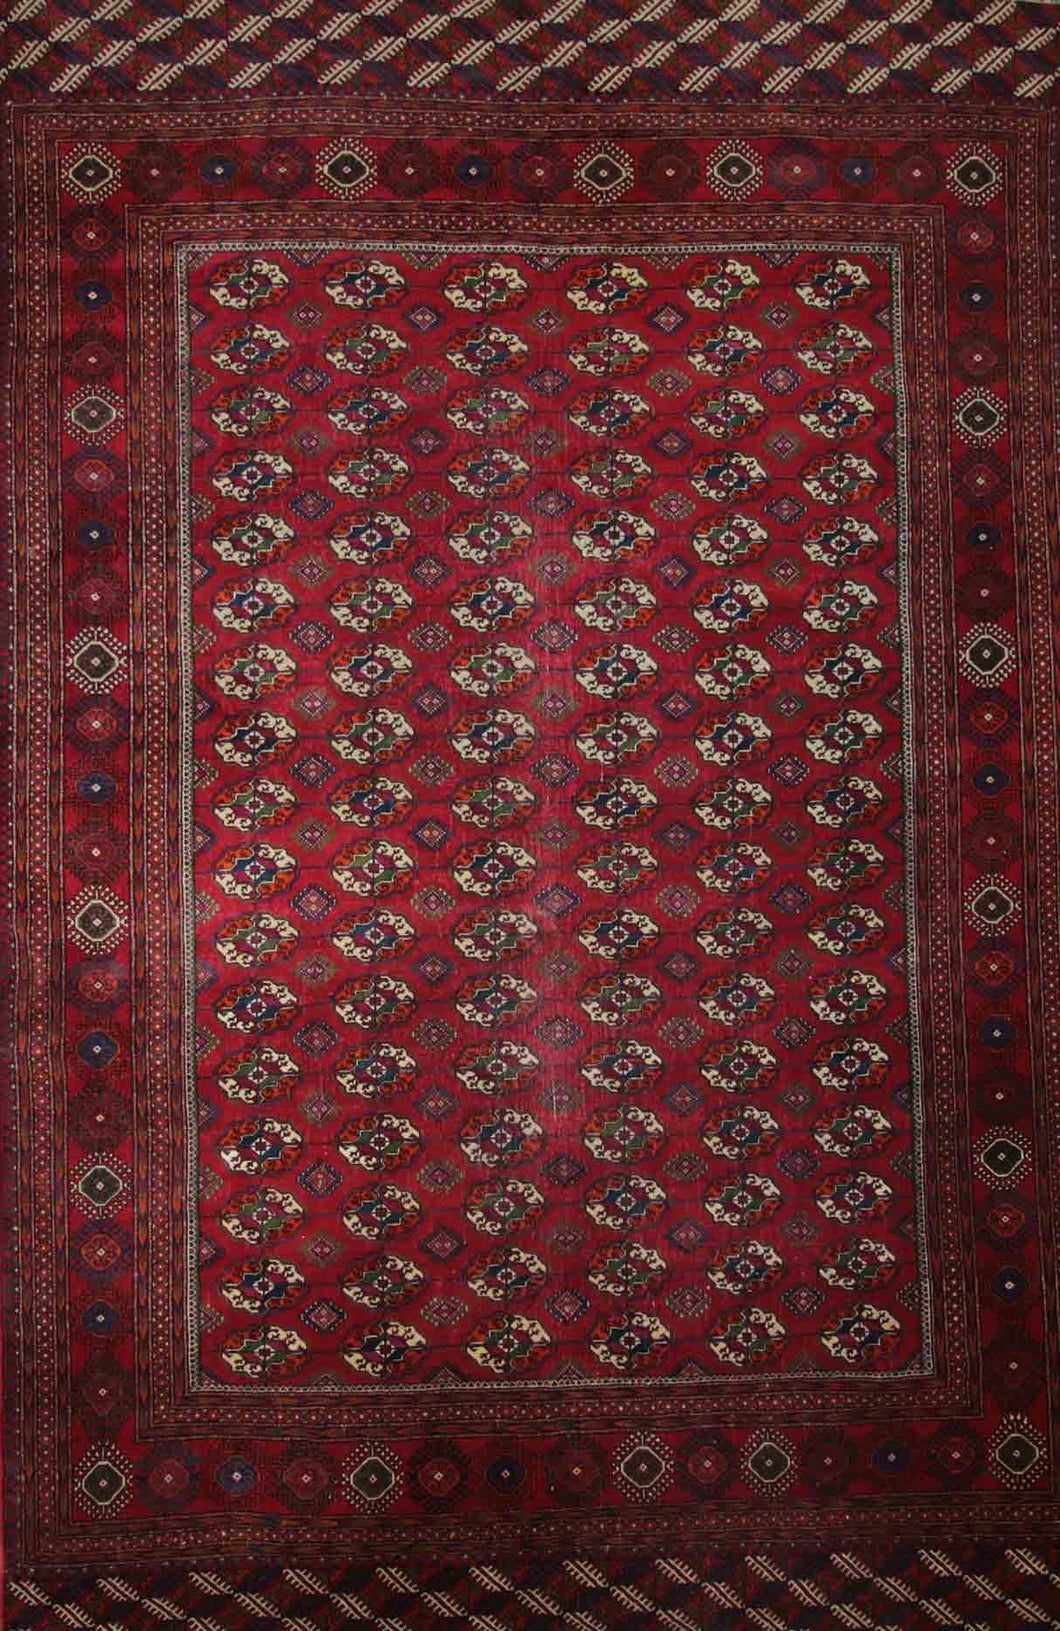 All-Over Geometric Antique Bokhara Oriental Rug 8x10 One of a Kind